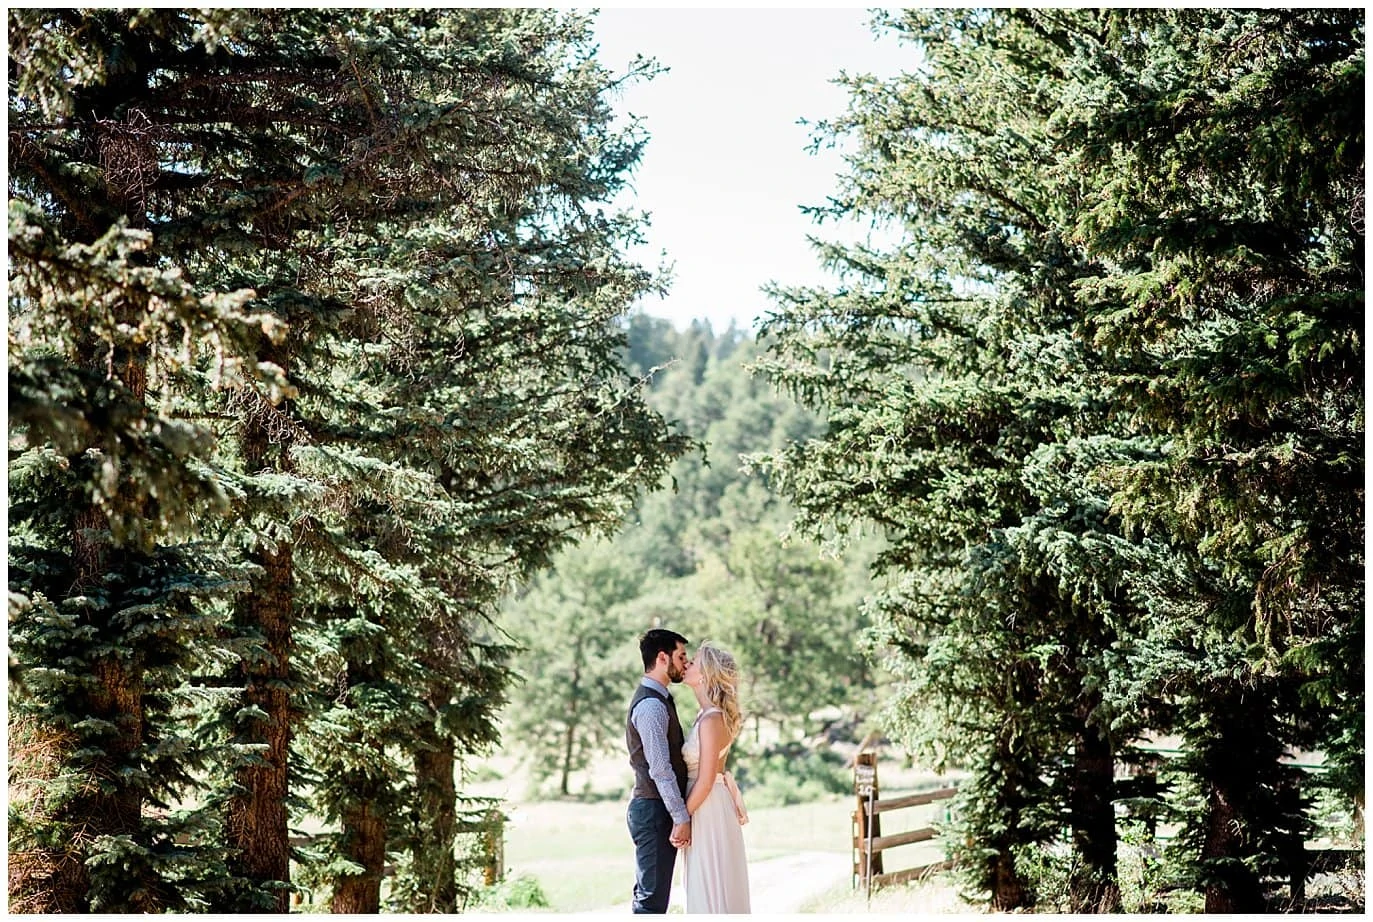 Colorful bride and groom portrait in evergreen trees at Deer Creek Valley Ranch wedding by Boulder Wedding Photographer Jennie Crate Photographer